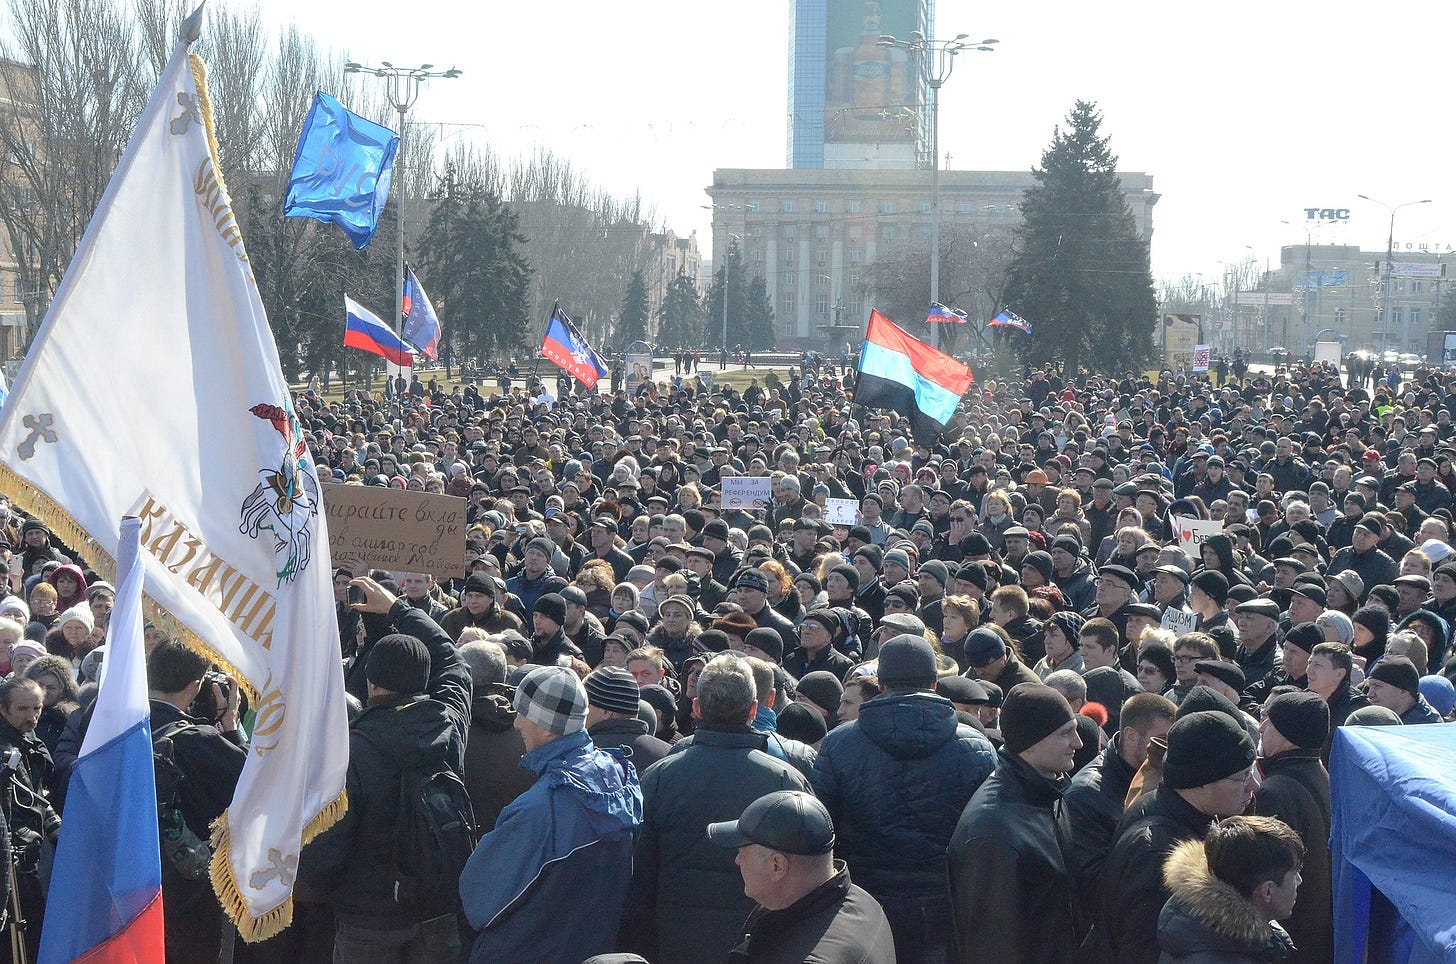 A pro-Russia protest in Donetsk in March 2014 (Image: Andrew Butko, CC BY-SA 3.0, via Wikimedia Commons)